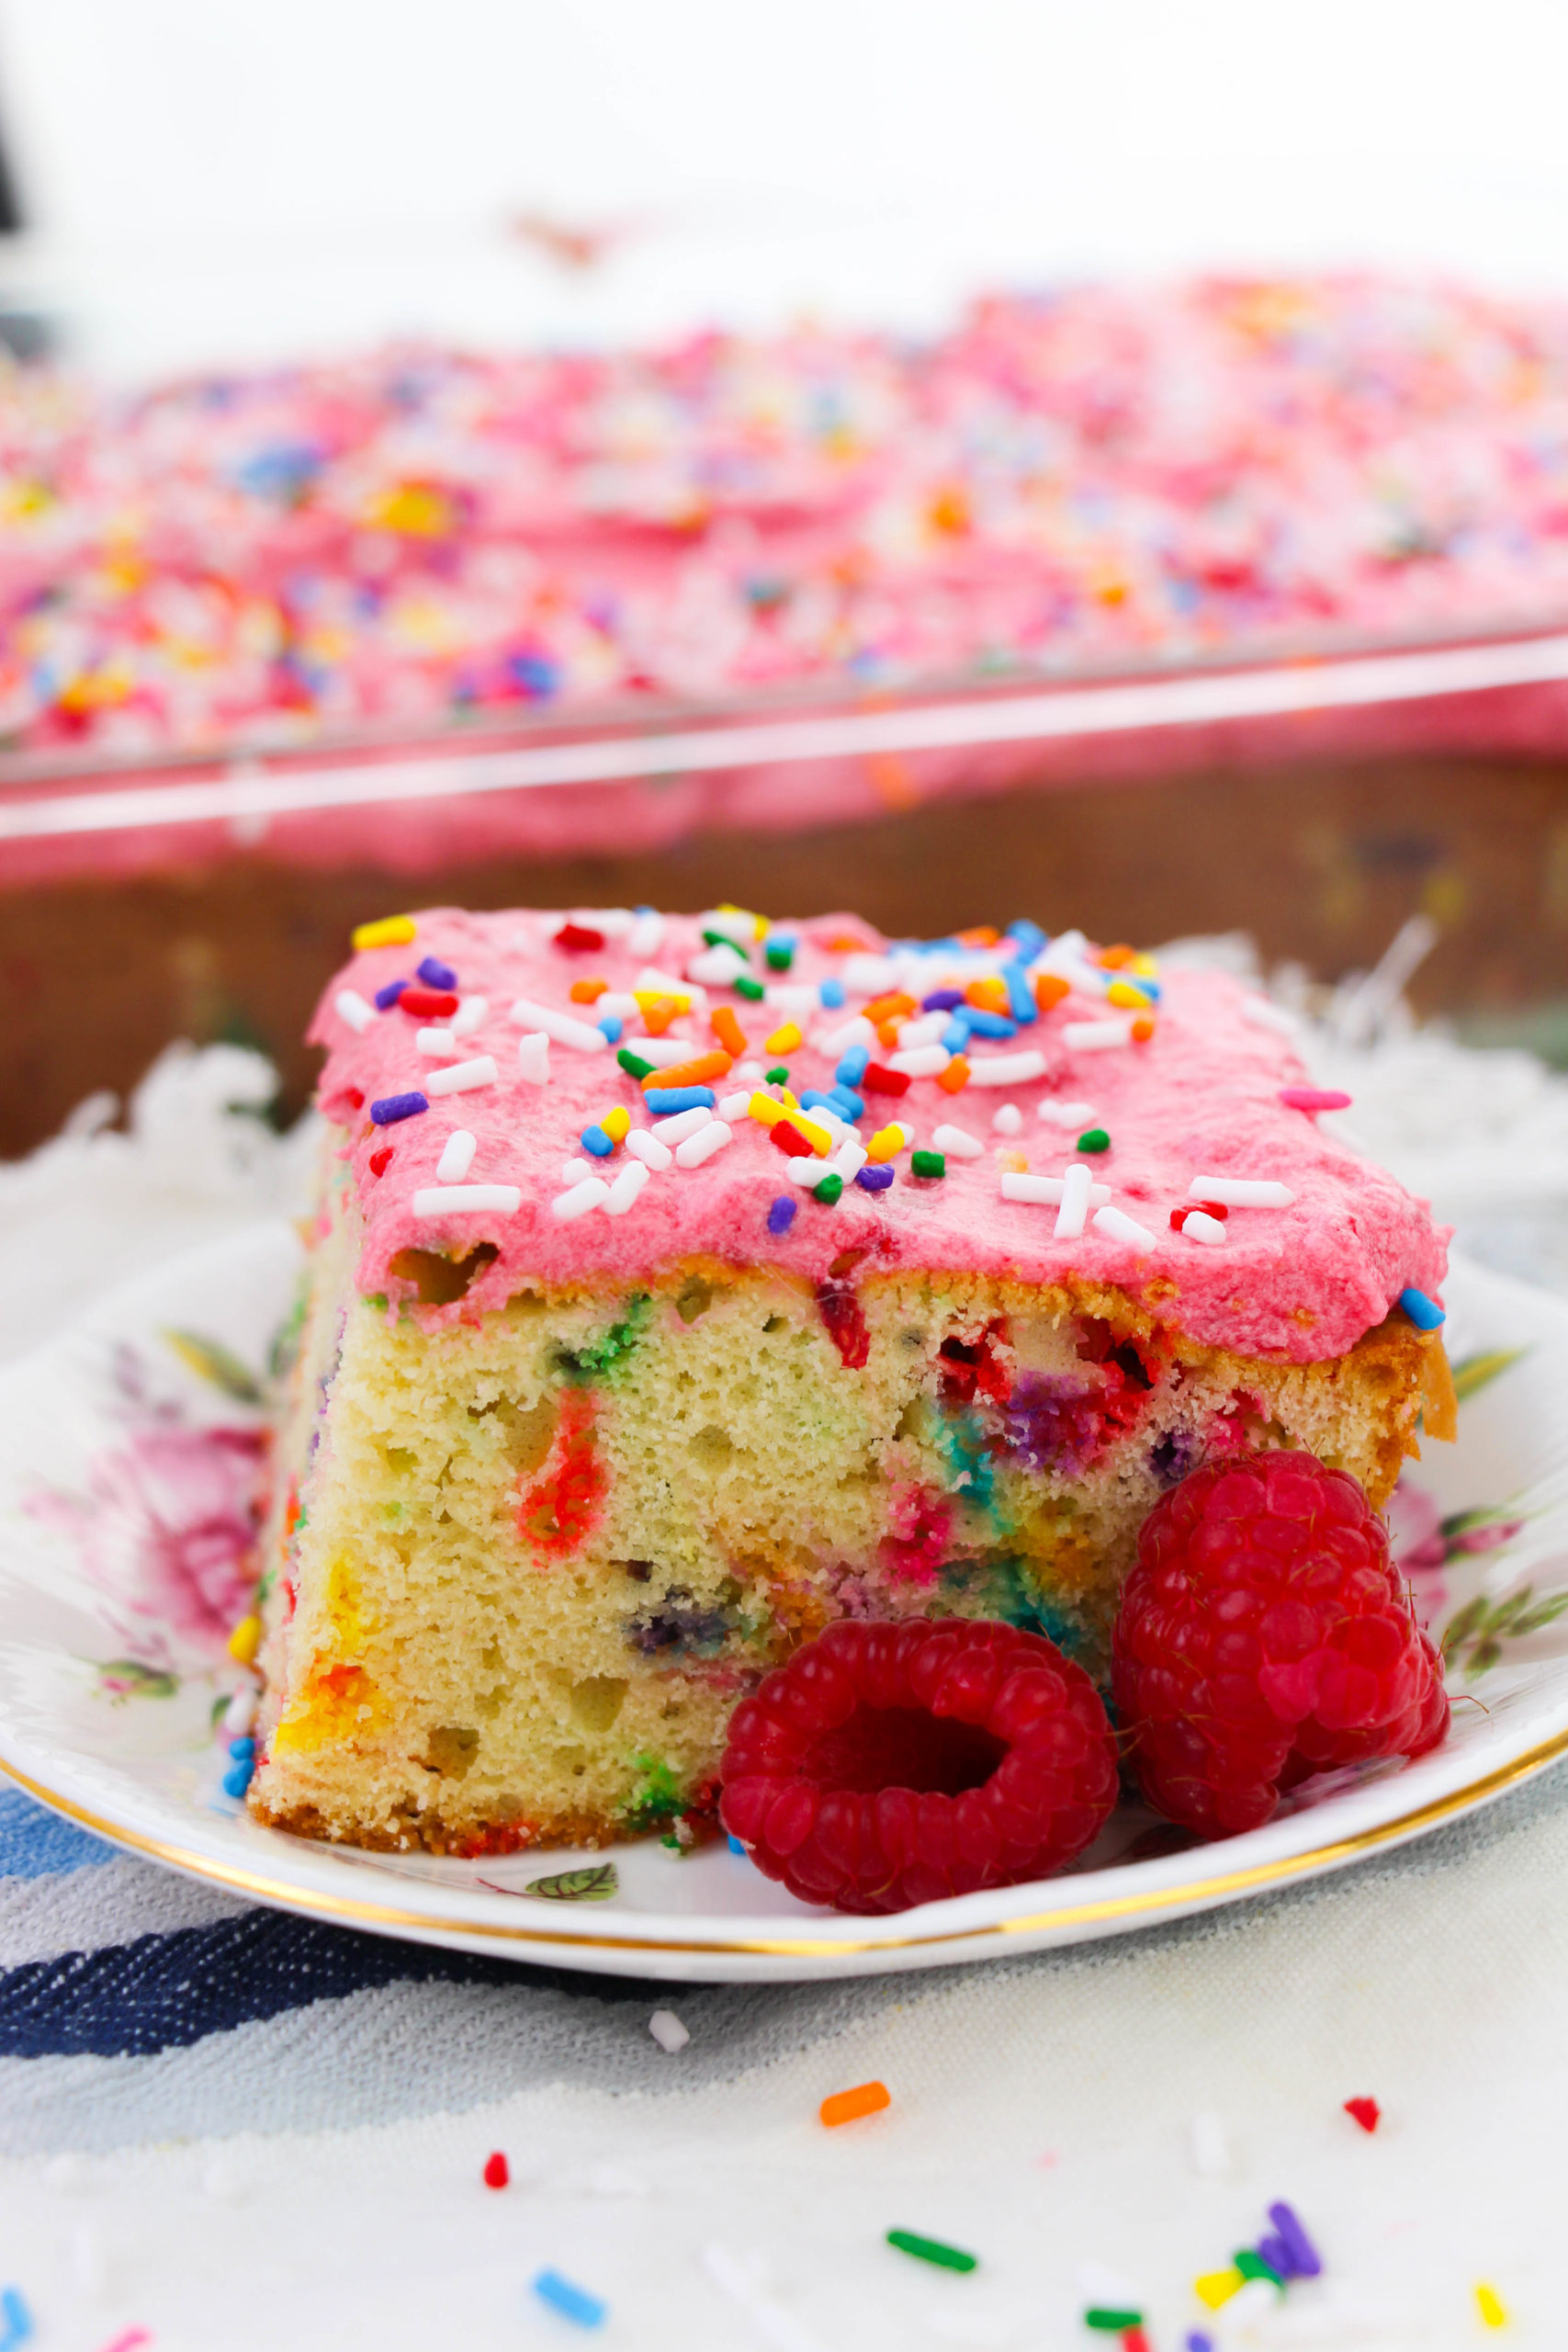 Raspberry Buttercream Frosting on a cake with sprinkles.